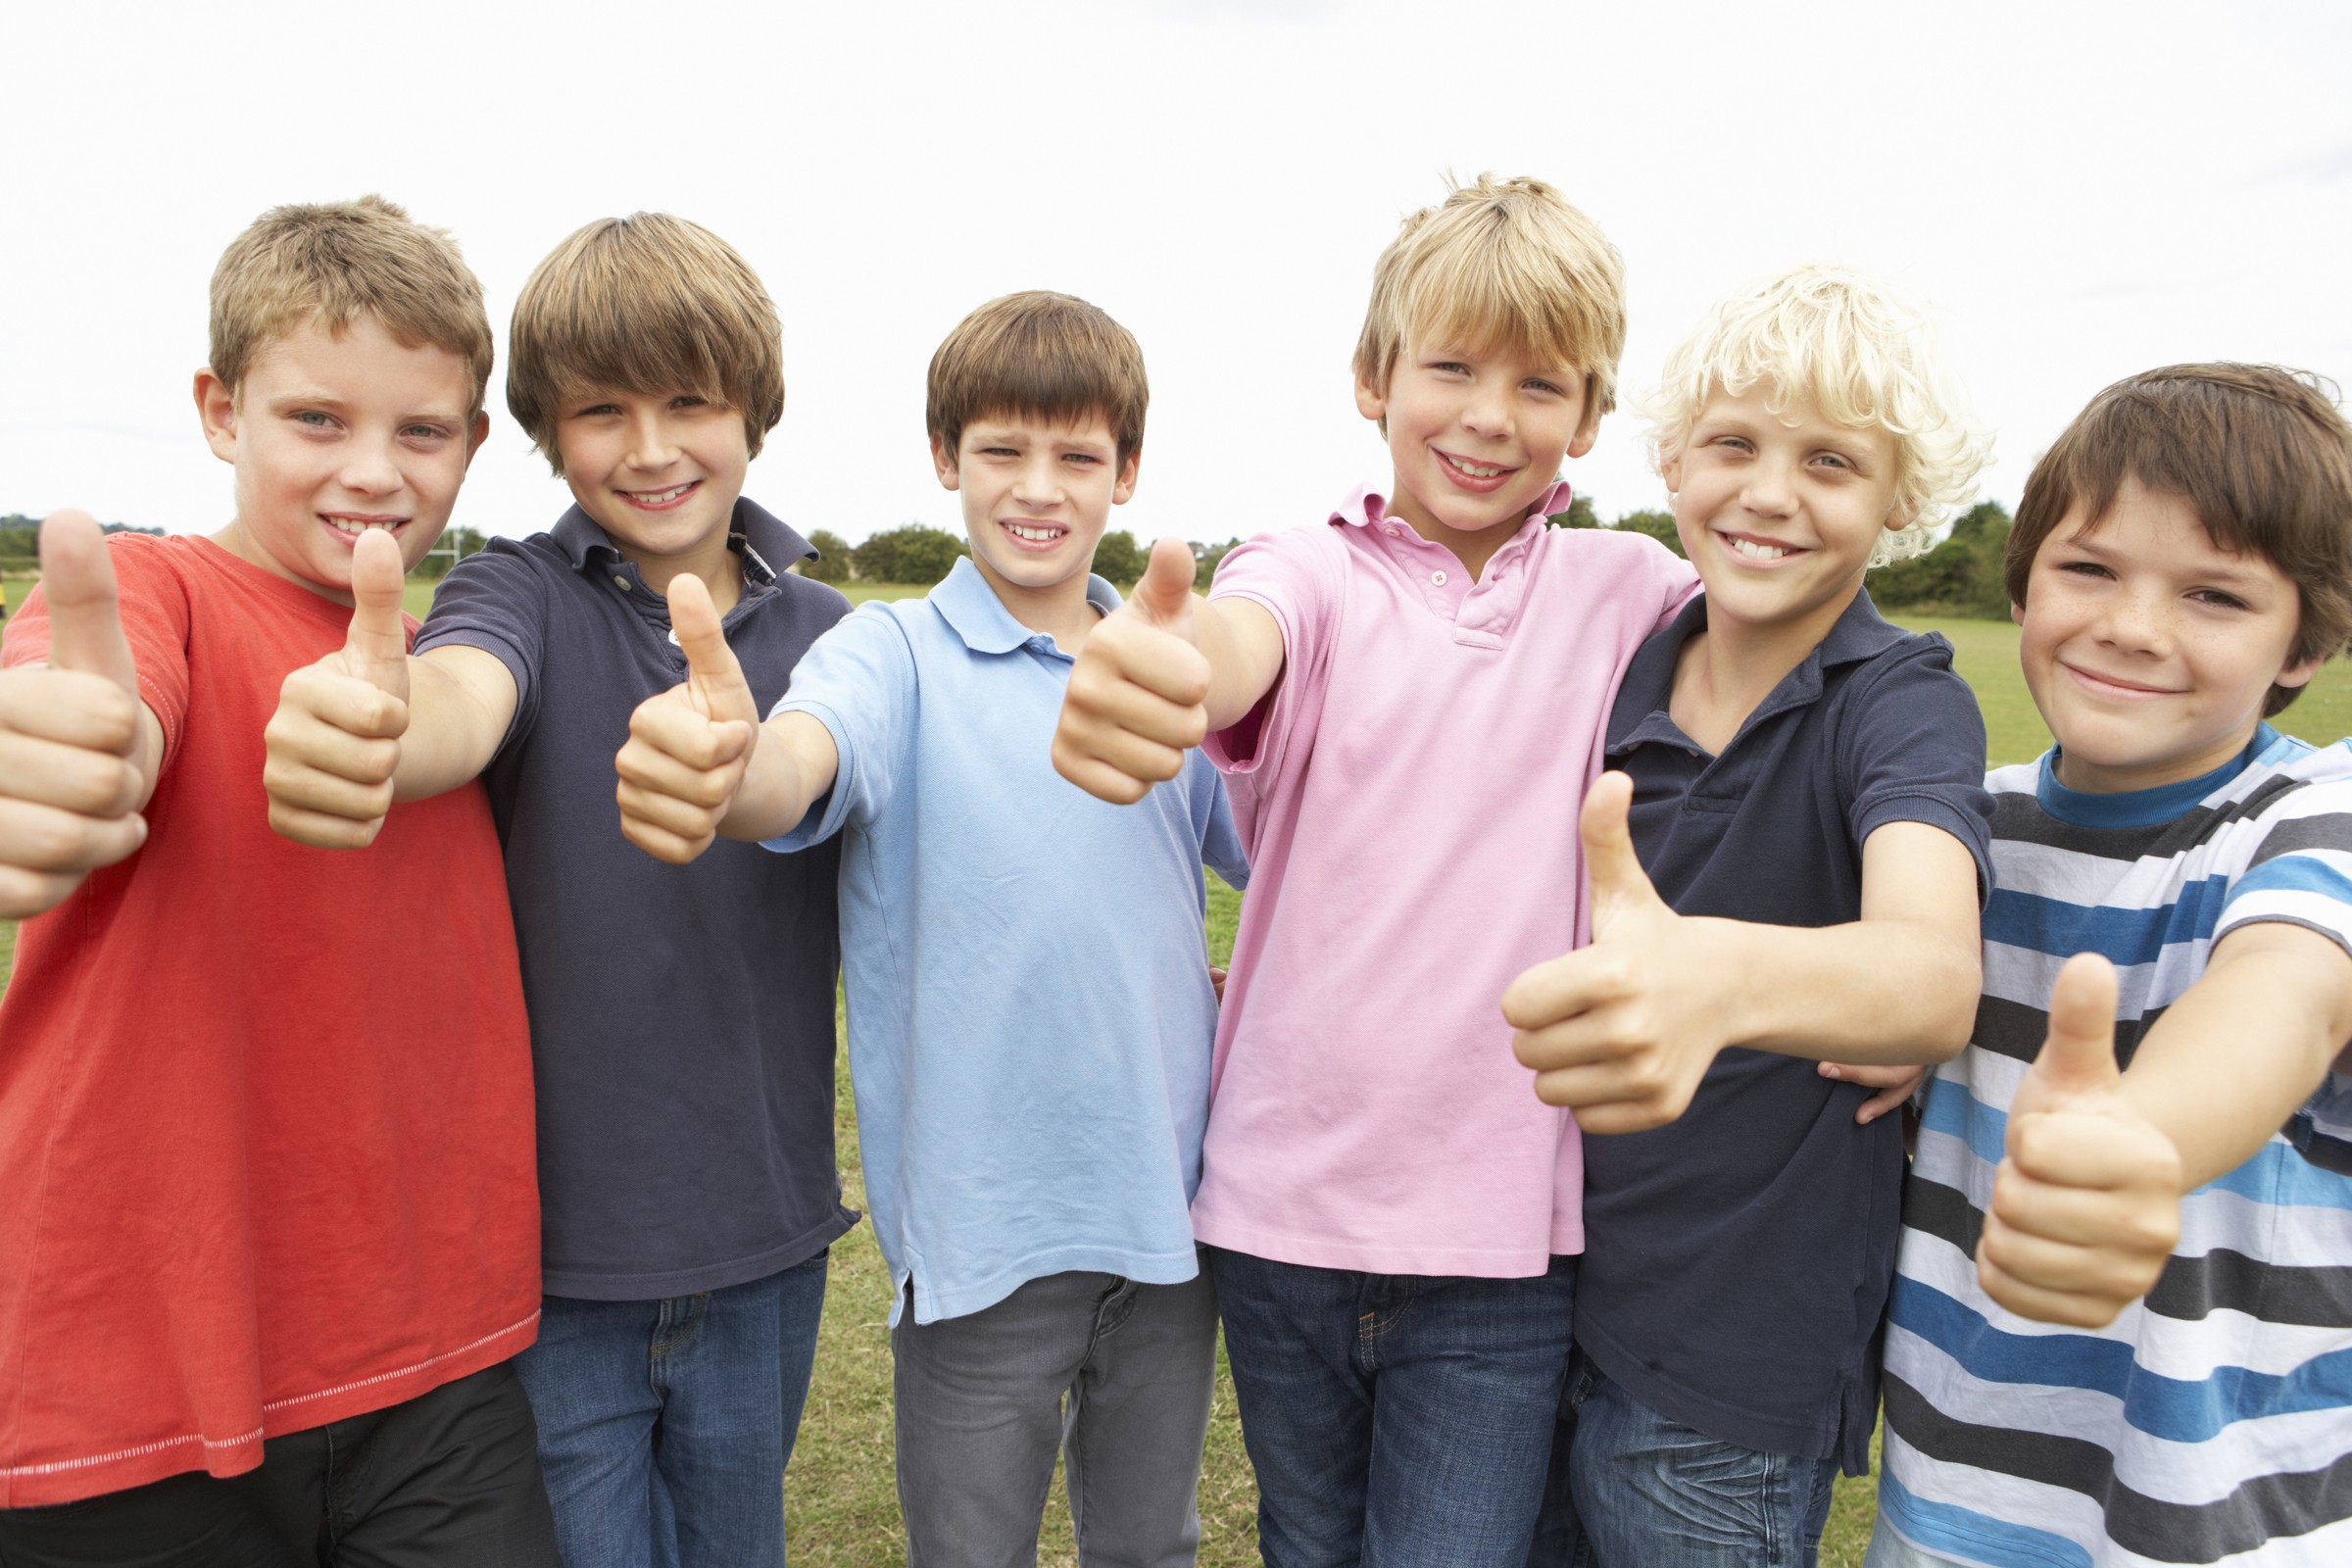 Portrait group of boys doing thumbs up in park